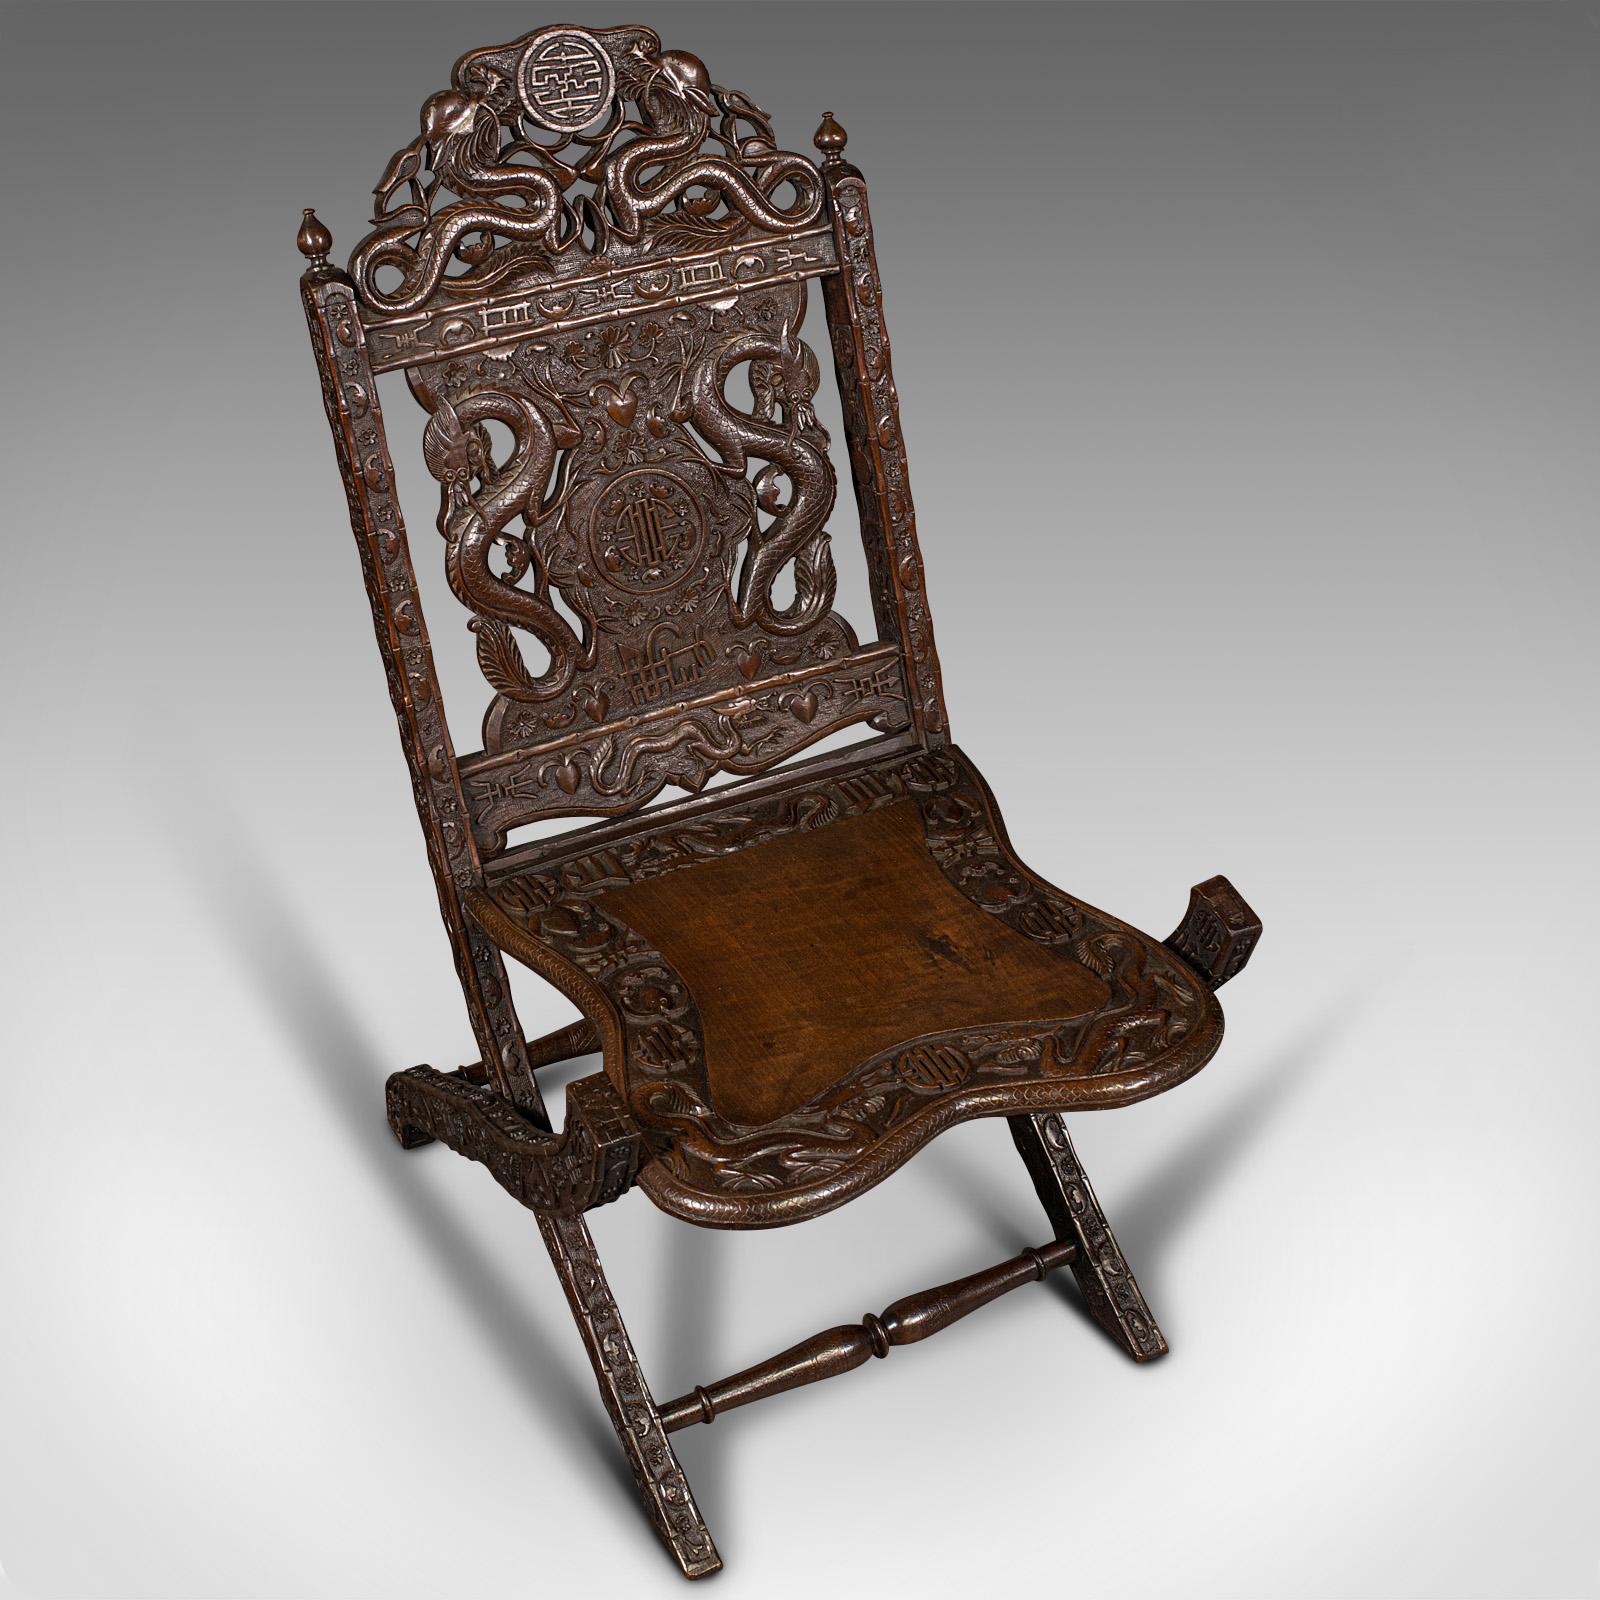 Antique Campaign Chair, Chinese, Carved, Folding Colonial Seat, Victorian, 1850 1